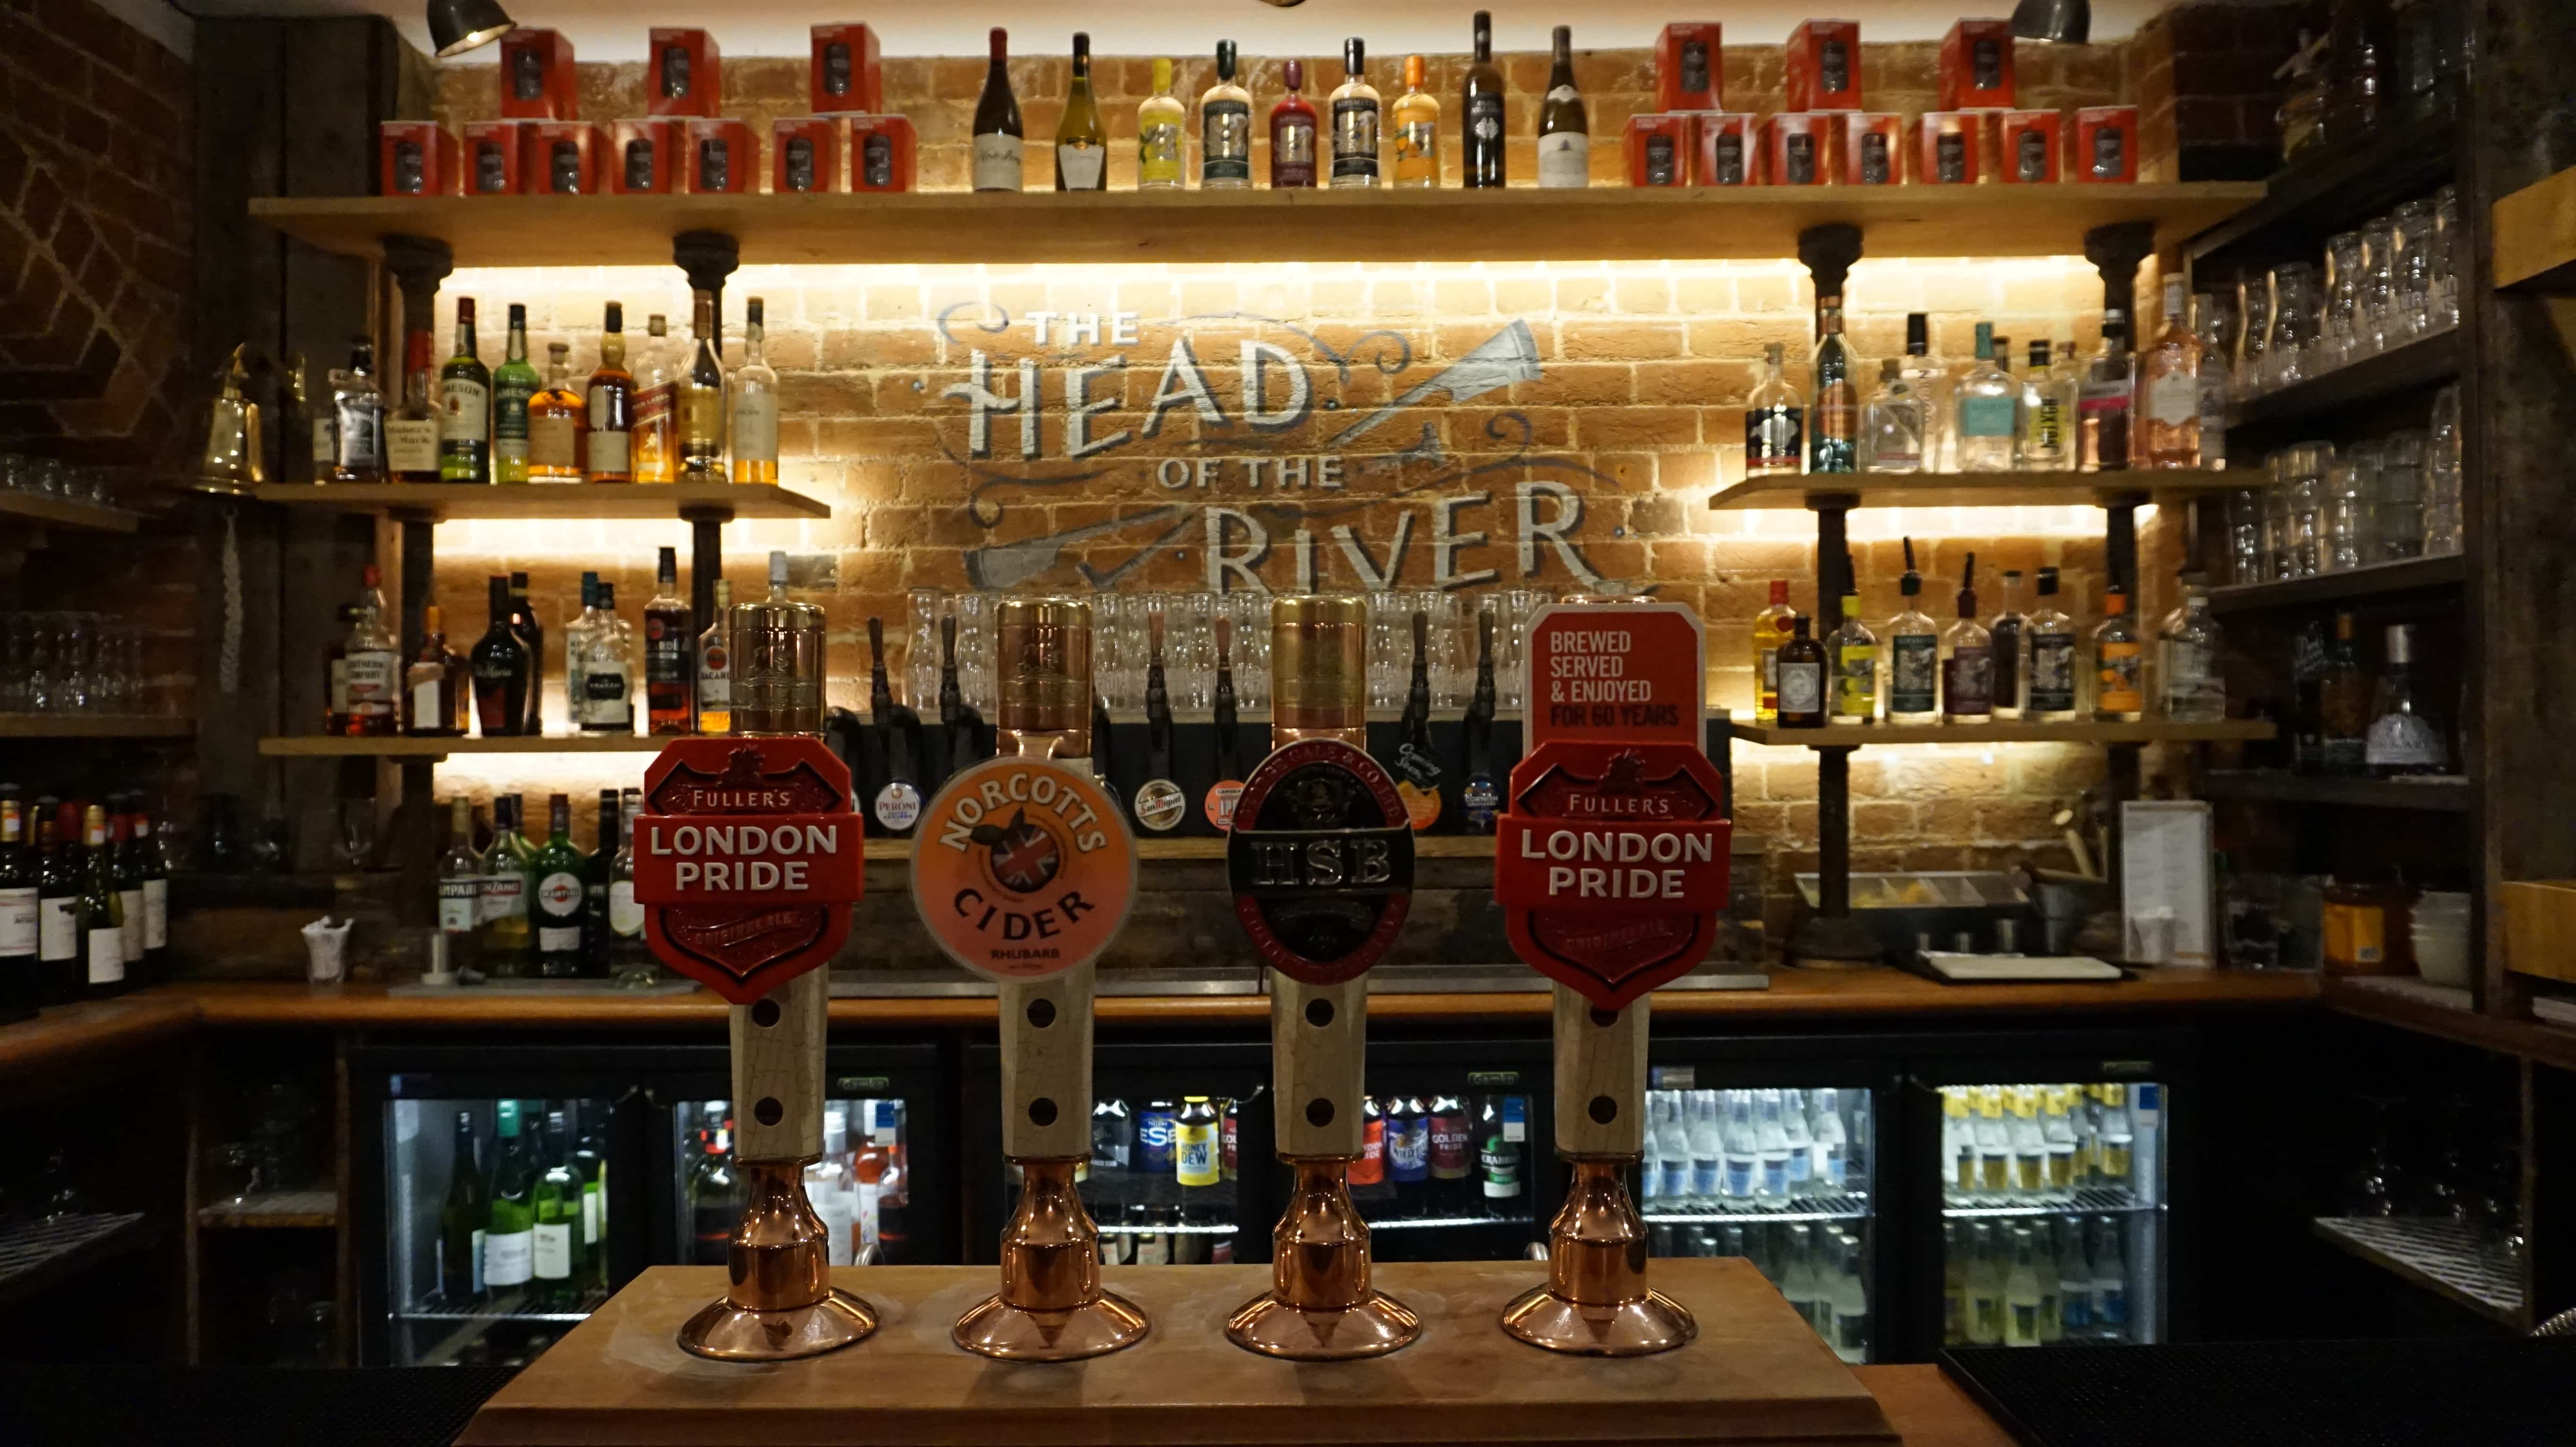 Bar at the Head of the River Oxford